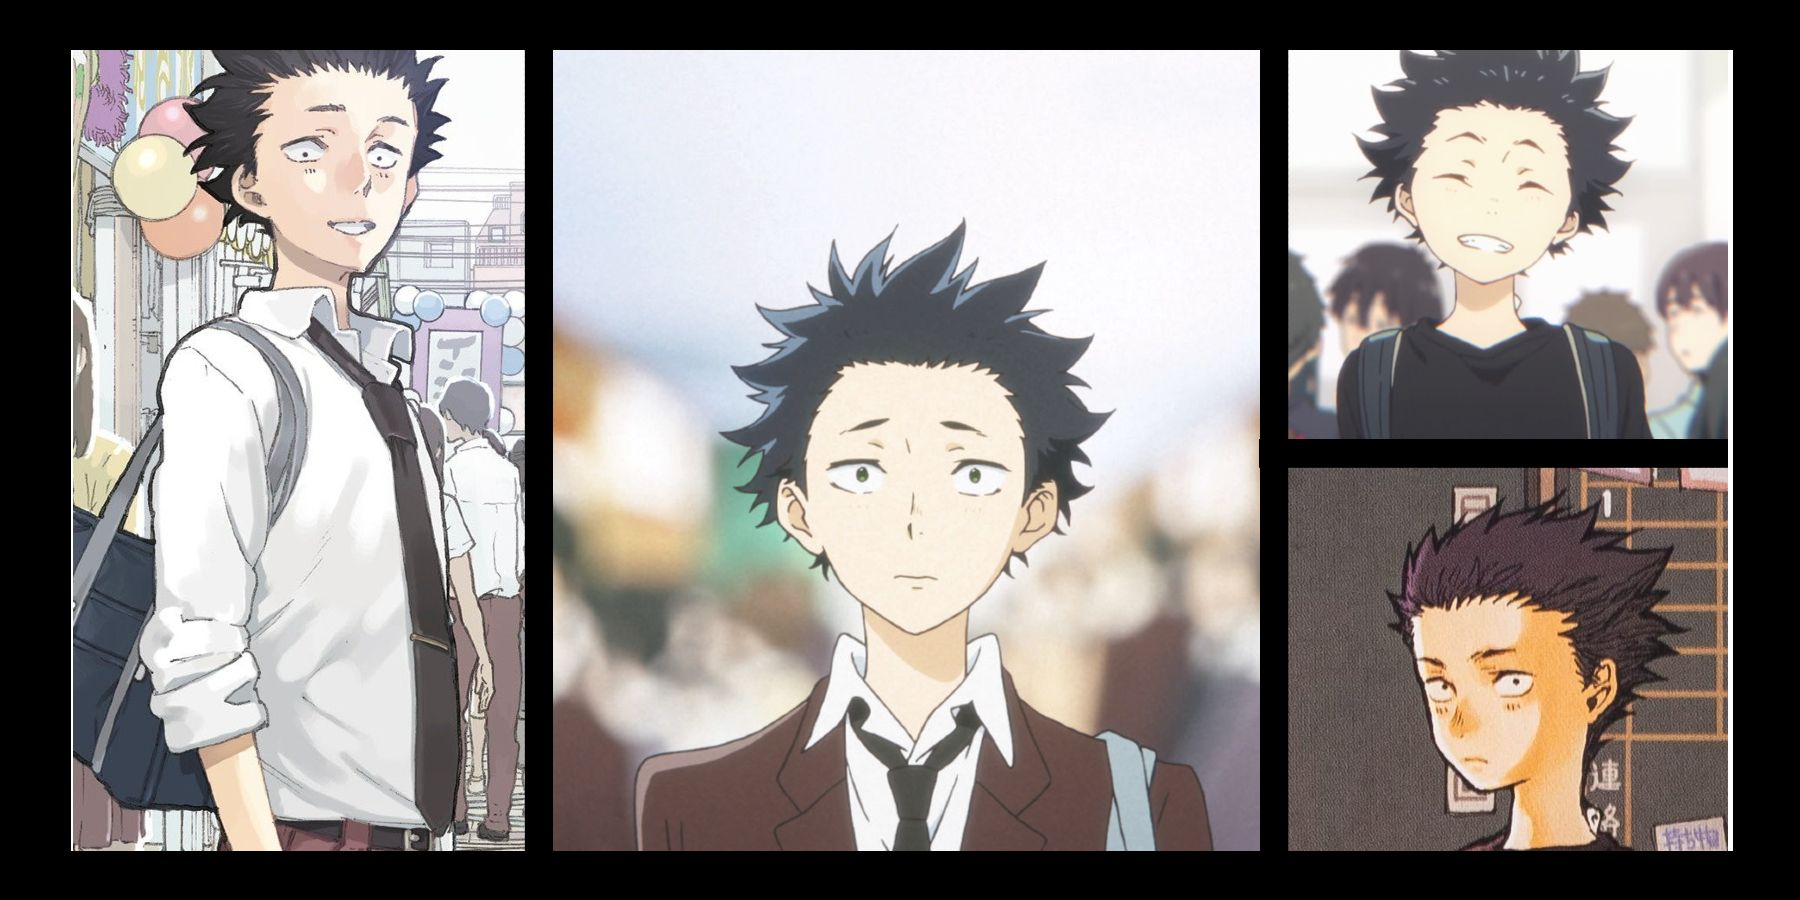 A Silent Voice: The Biggest Differences Between the Anime and the Manga